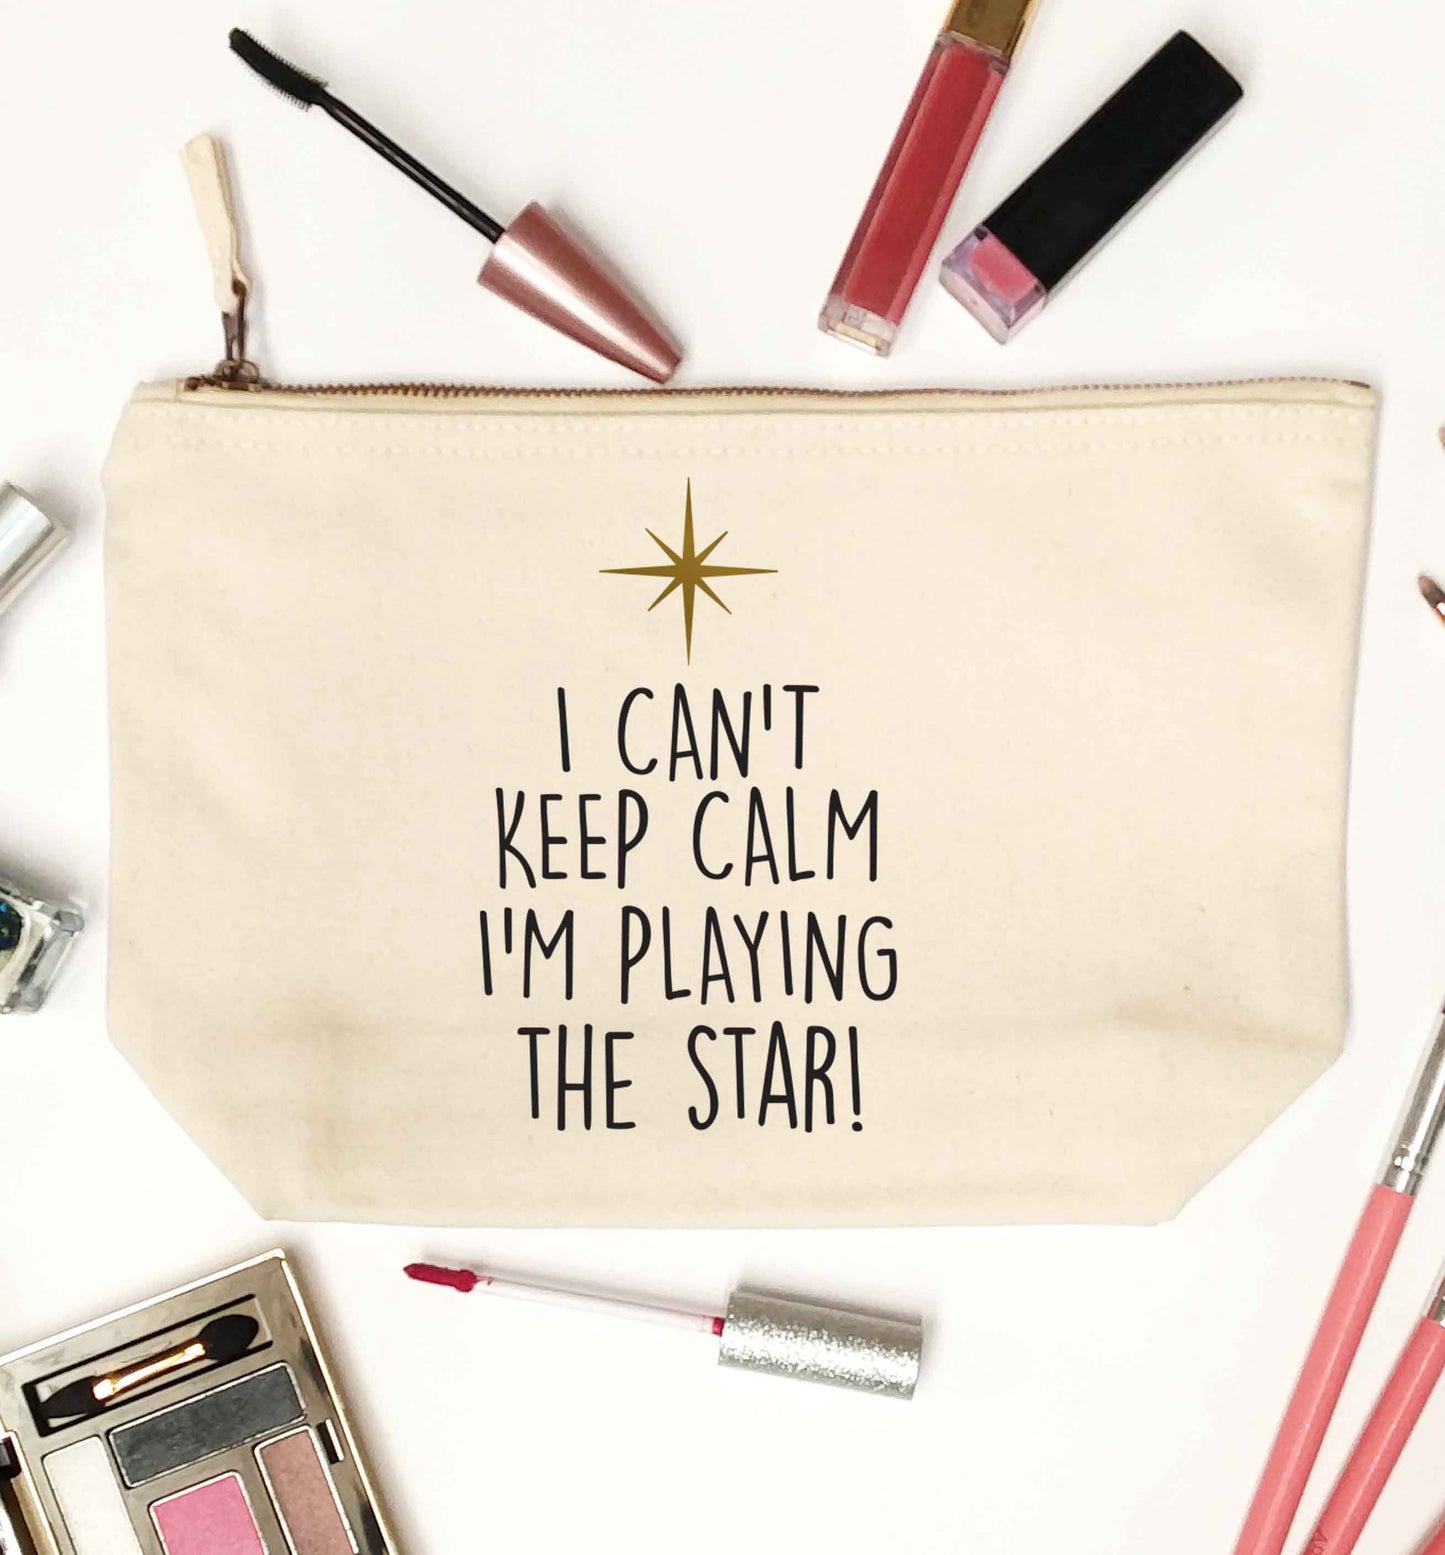 I can't keep calm I'm playing the star! natural makeup bag